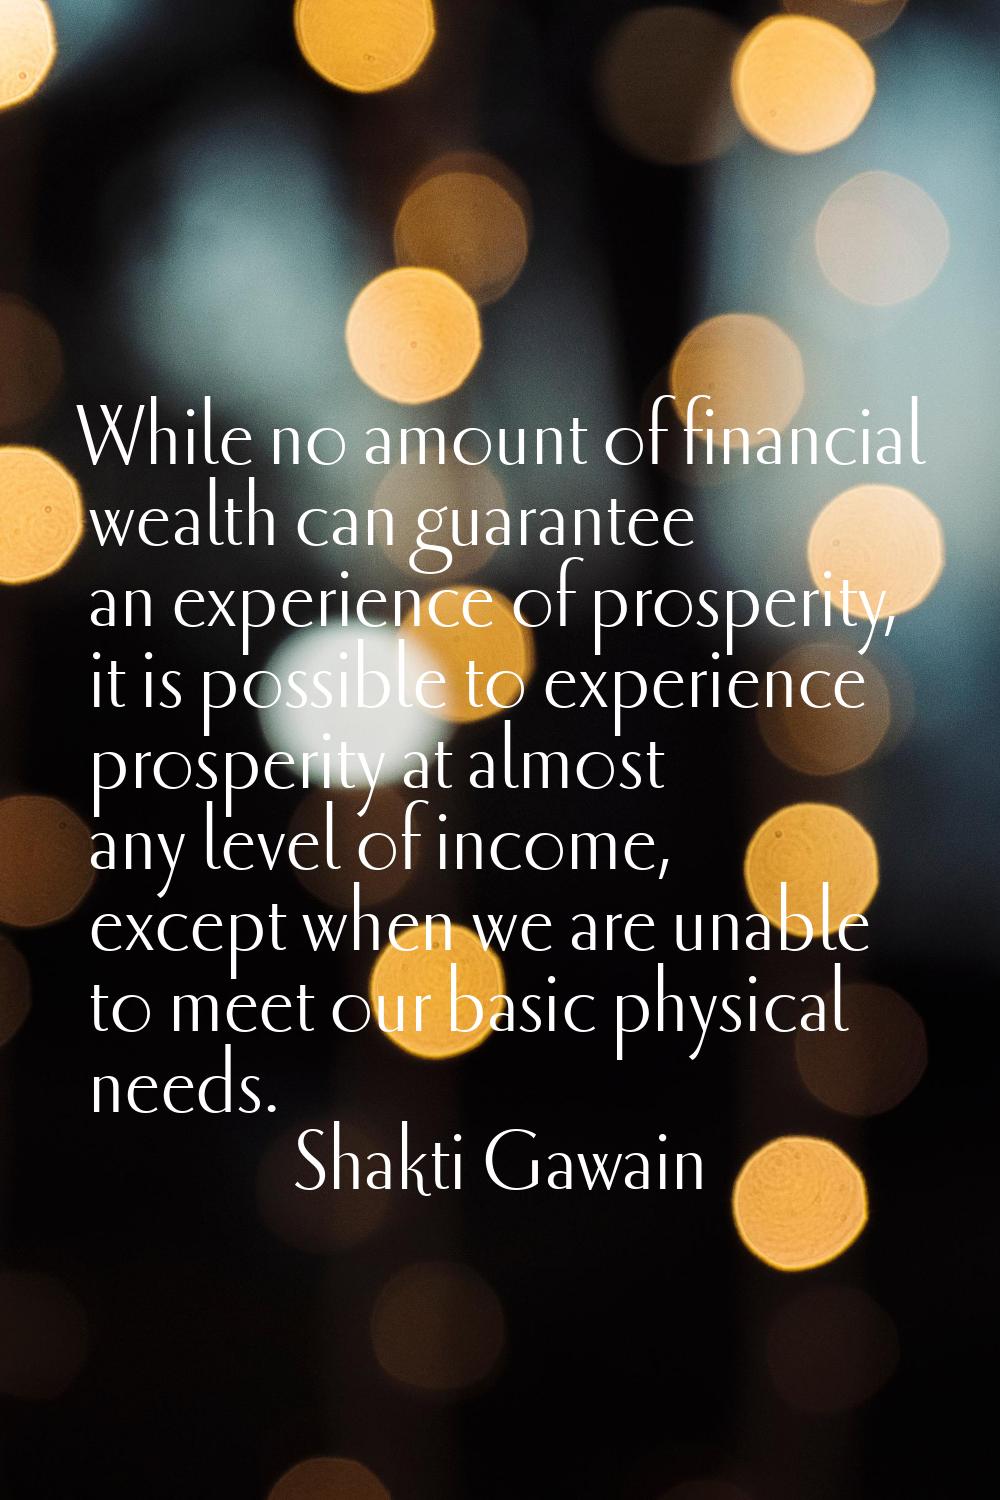 While no amount of financial wealth can guarantee an experience of prosperity, it is possible to ex